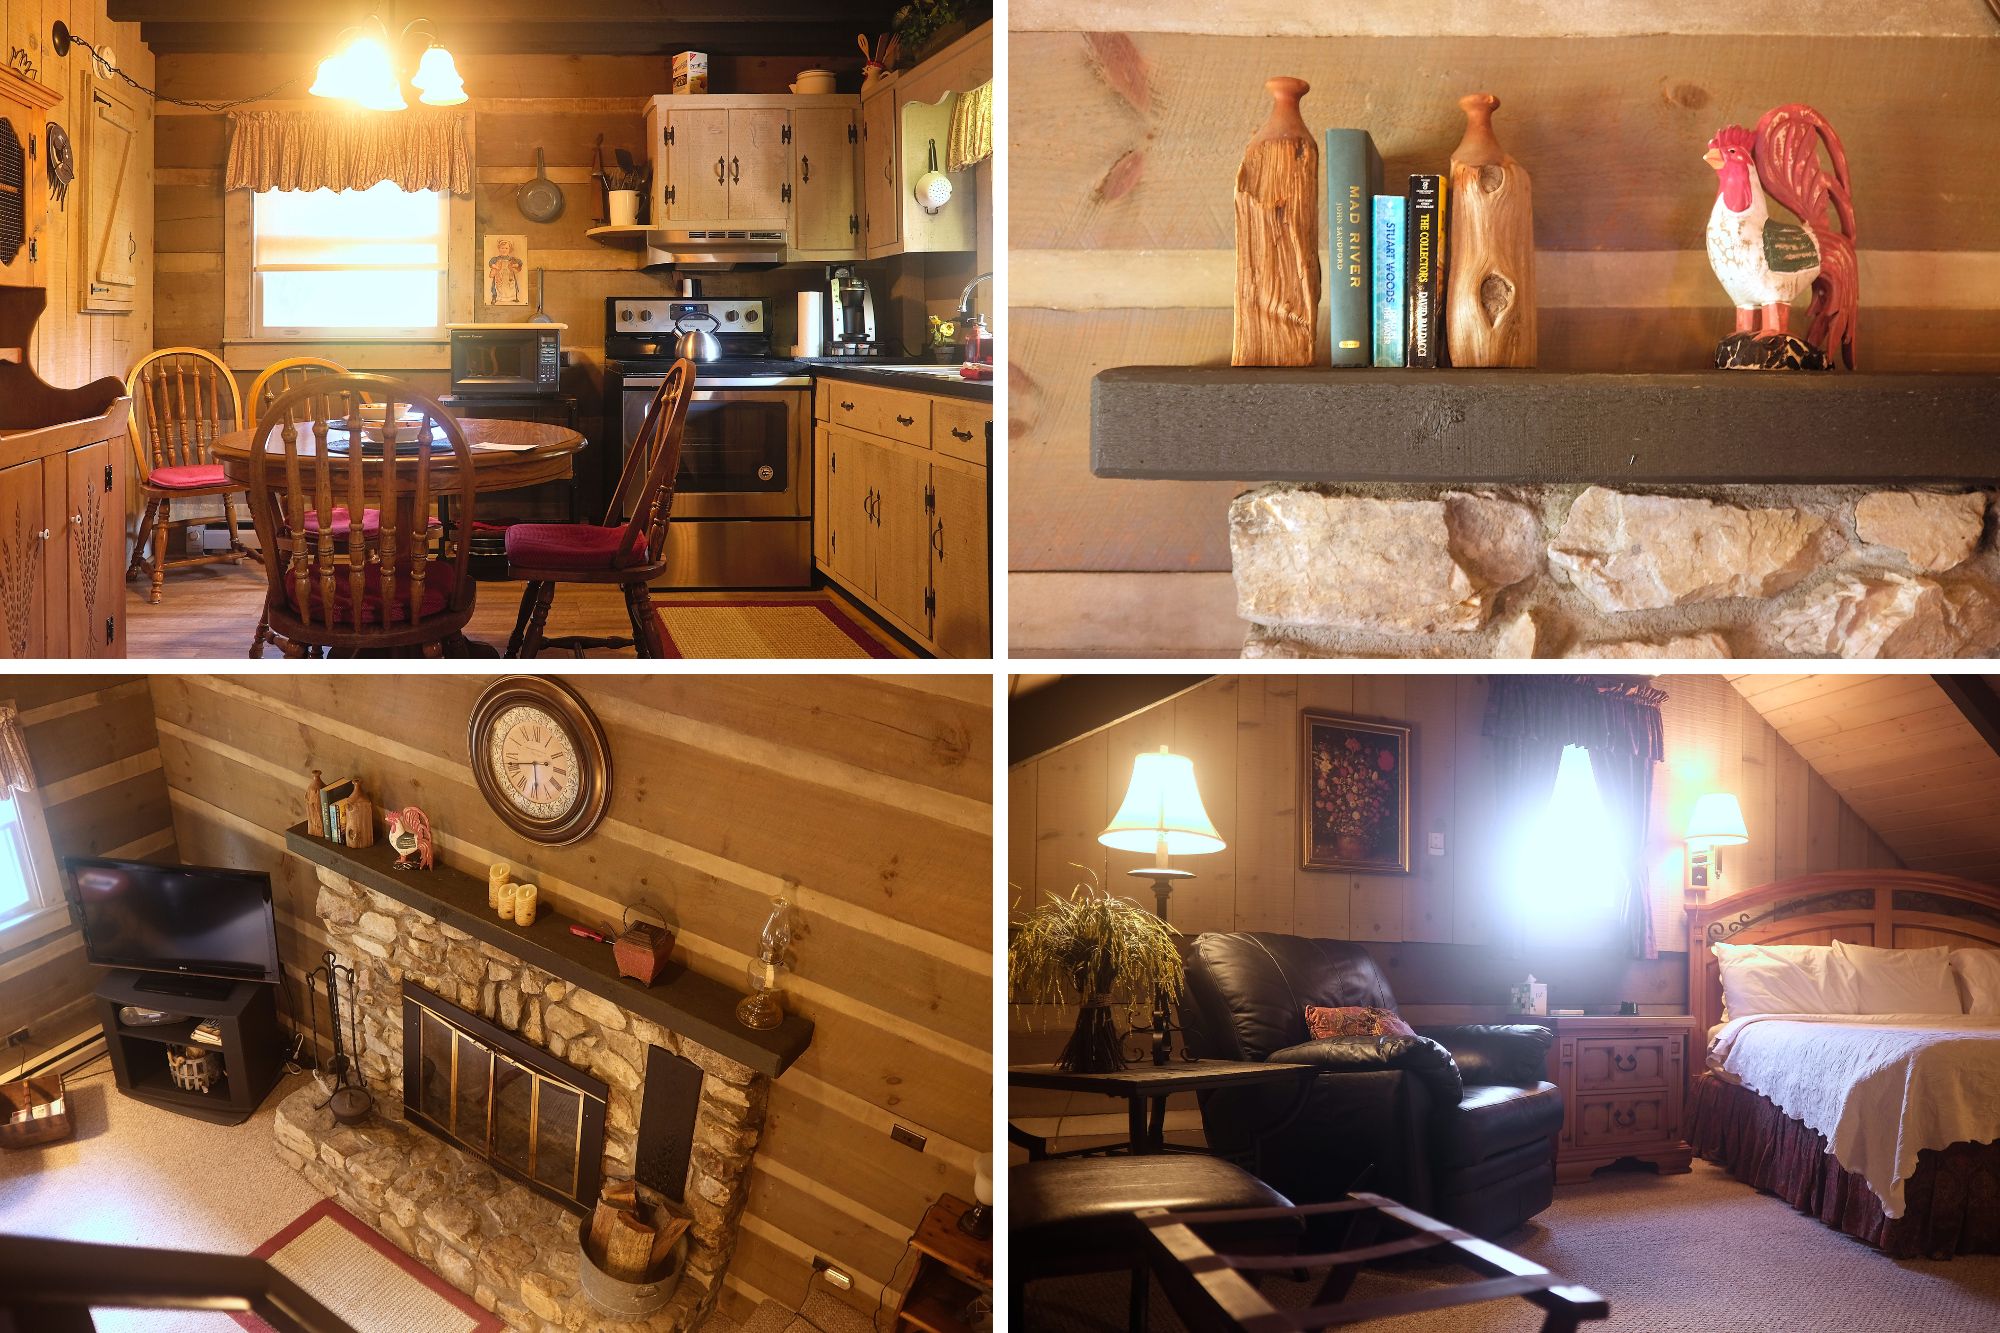 Four photos showing the interior of the cabin, including the kitchen, decor, fireplace, and loft